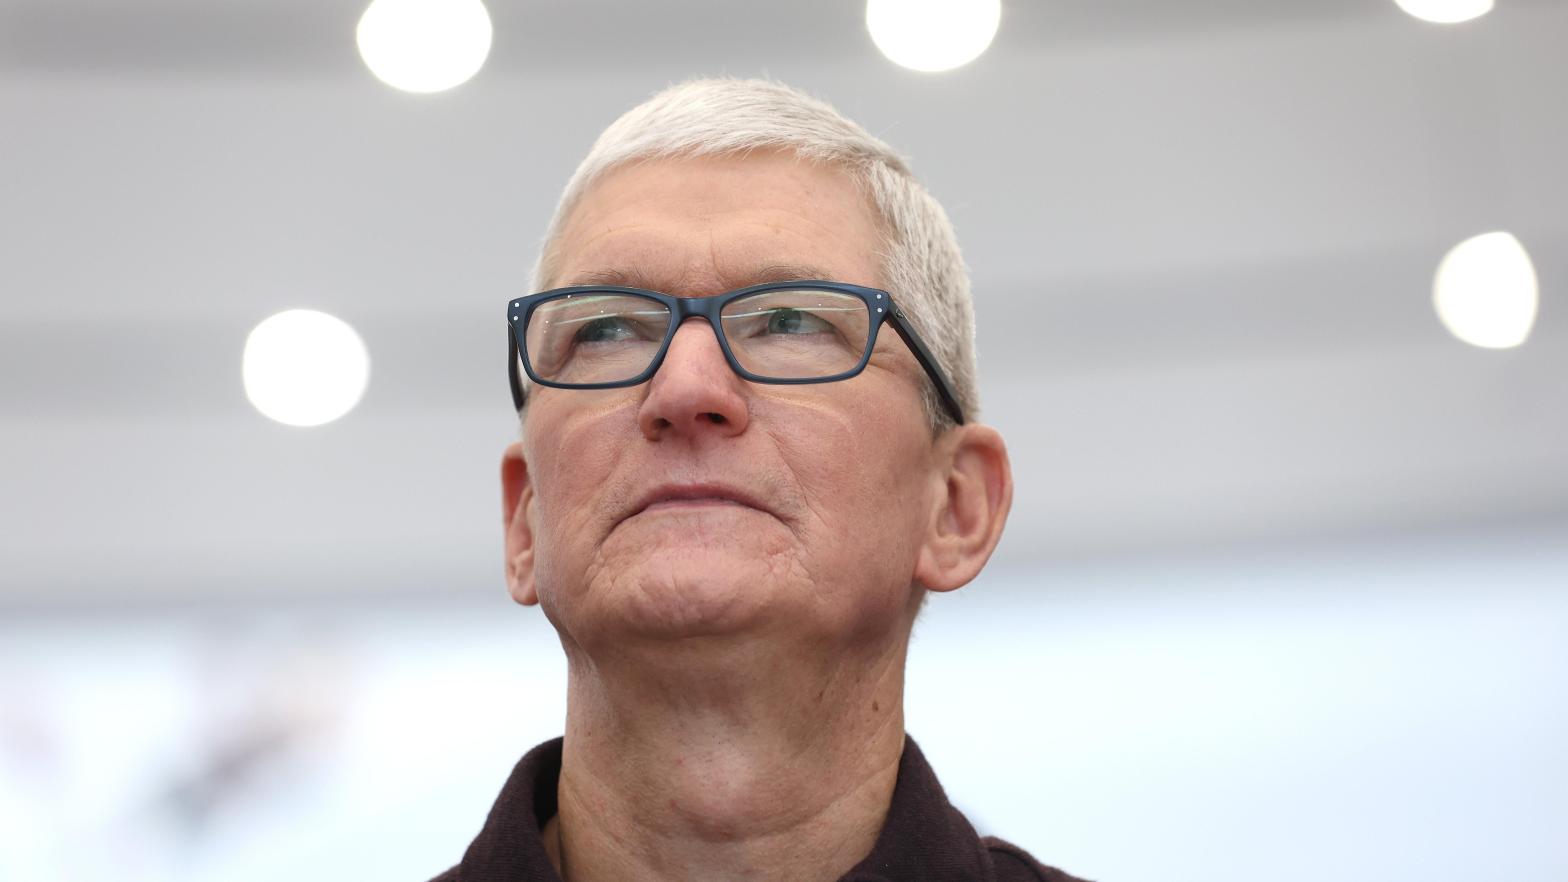 Apple CEO Tim Cook has been especially bullish on AR tech, but whatever the current iteration of glasses the company is cooking up behind the scenes has reportedly not met expectations. (Photo: Justin Sullivan, Getty Images)